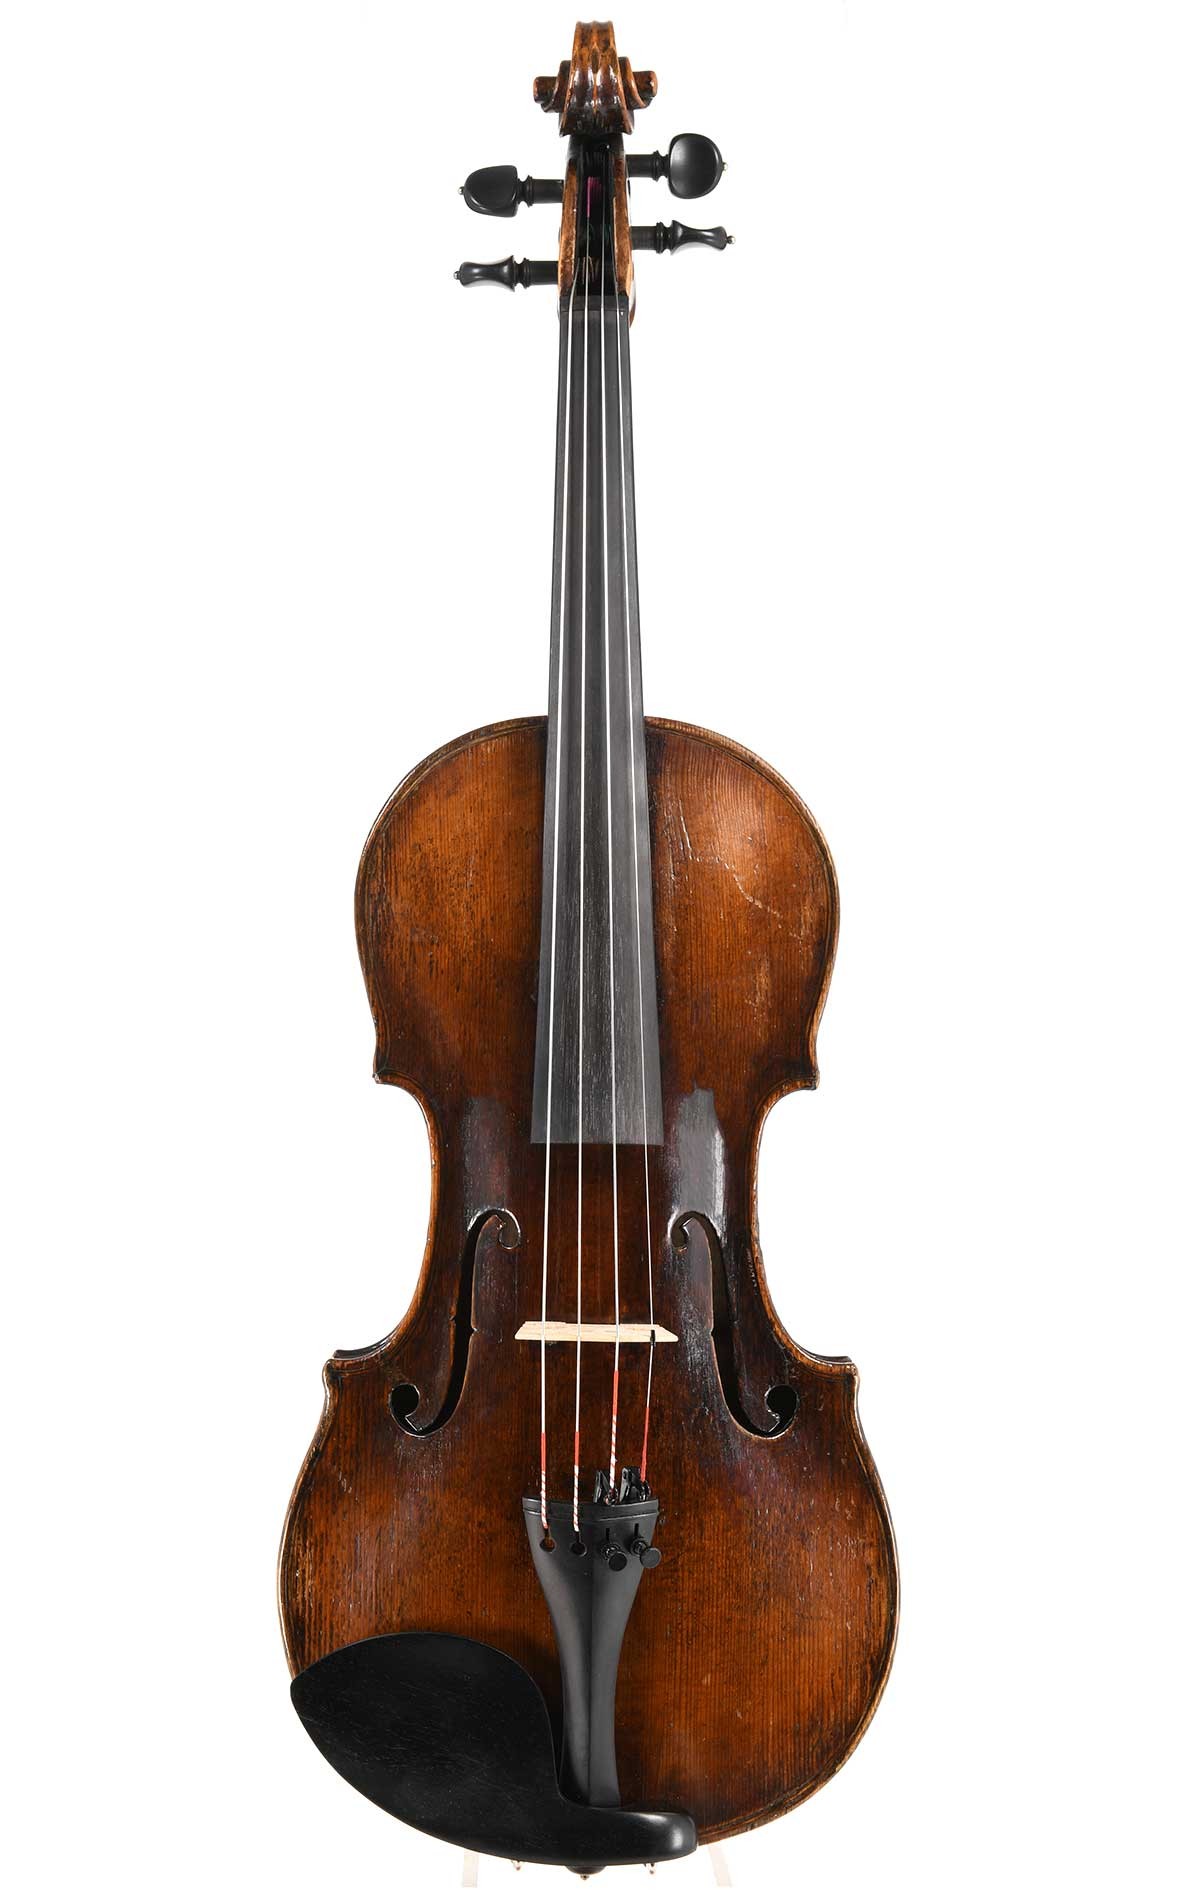 Interesting violin, attributed to Dominicus Rief, around 1800